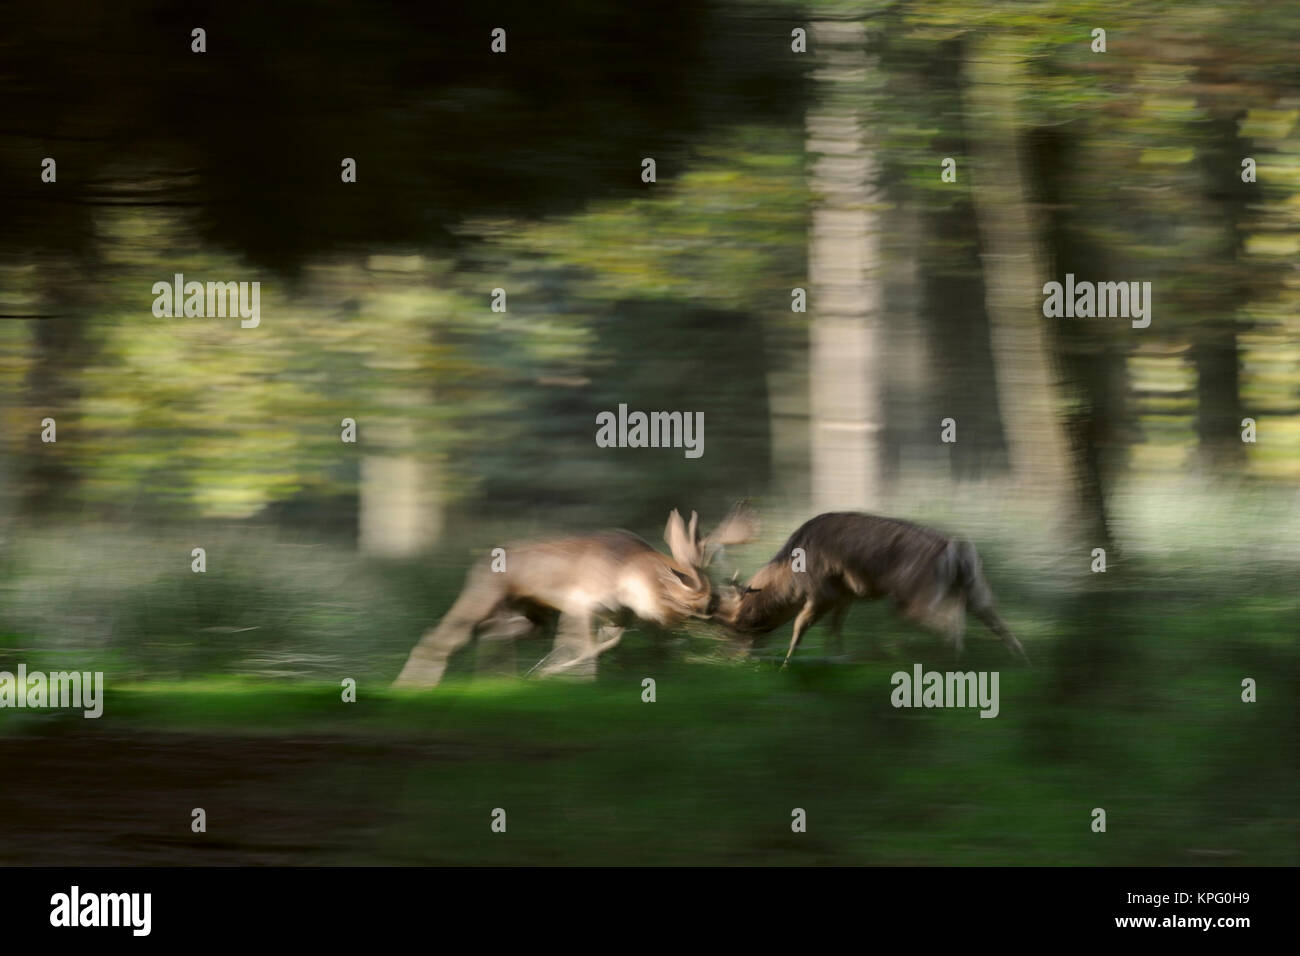 Fallow Deer ( Dama dama ) fighting, in hard fight, locking horns during rutting season, in the midst of a forest, in motion, dynamic, blurred, Europe. Stock Photo